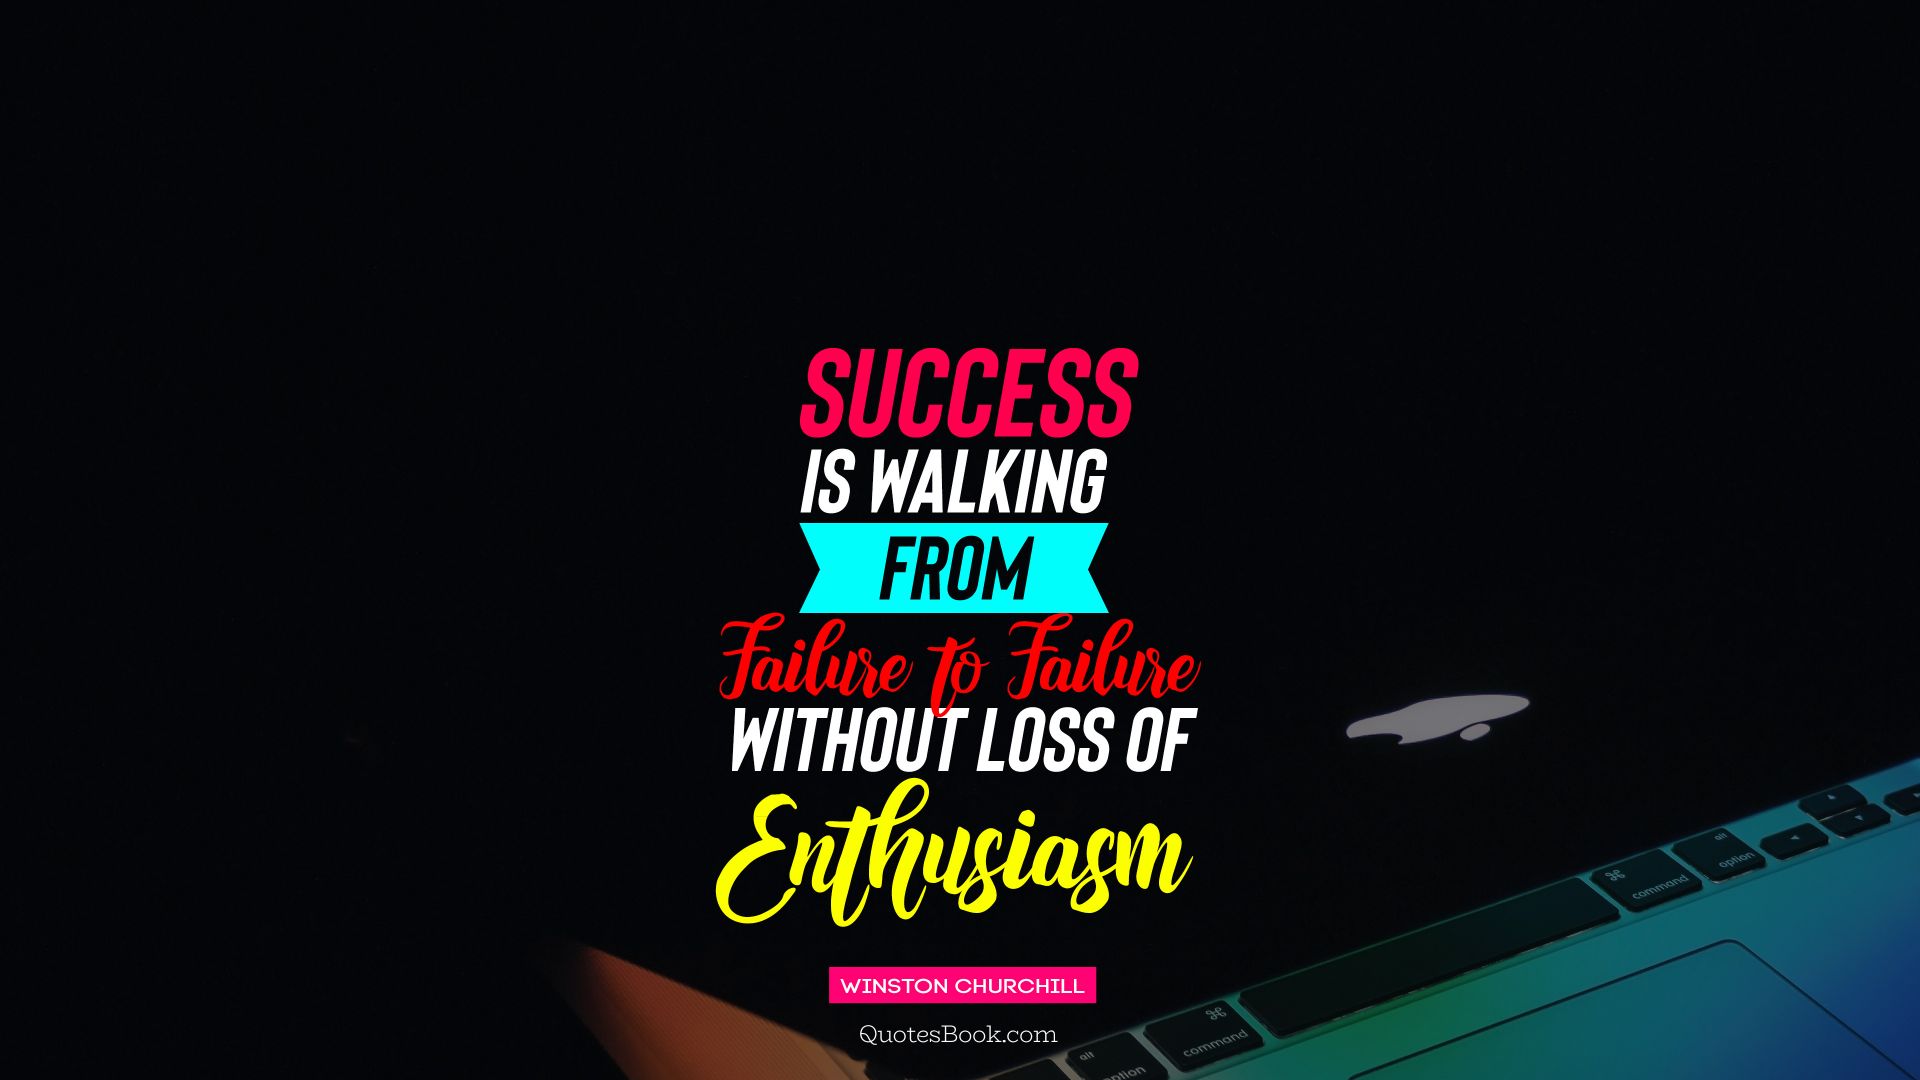 Success is walking from failure to failure without loss of enthusiasm. - Quote by Winston Churchill